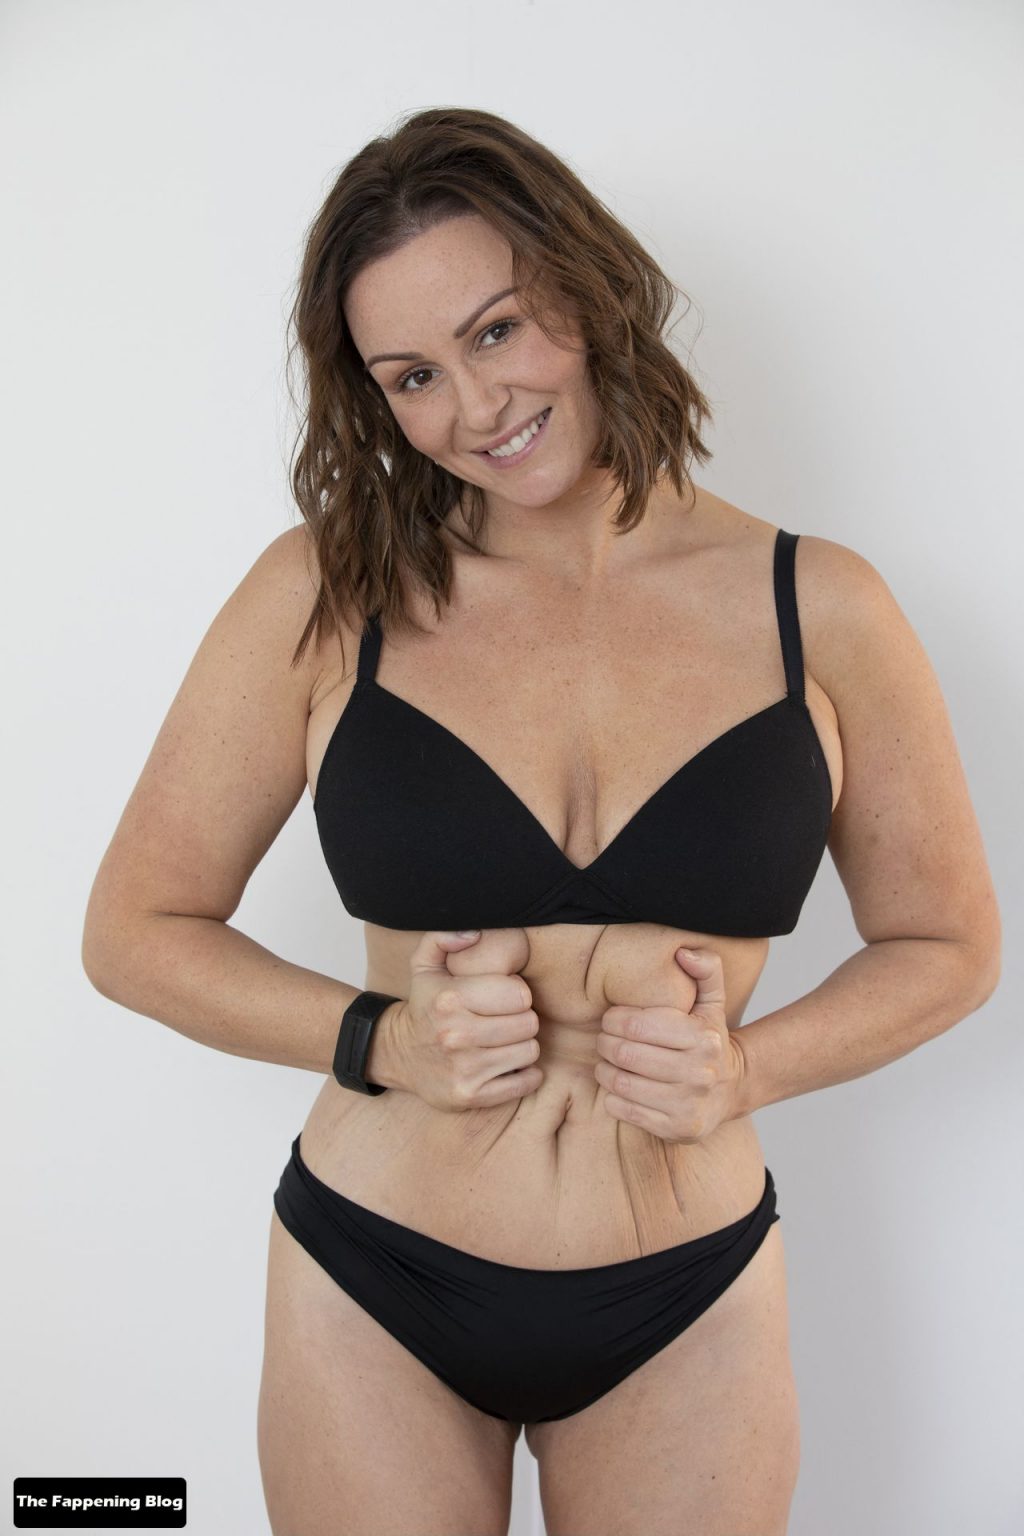 Body Positivity At Home Shoot With Chanelle Hayes (27 Photos)